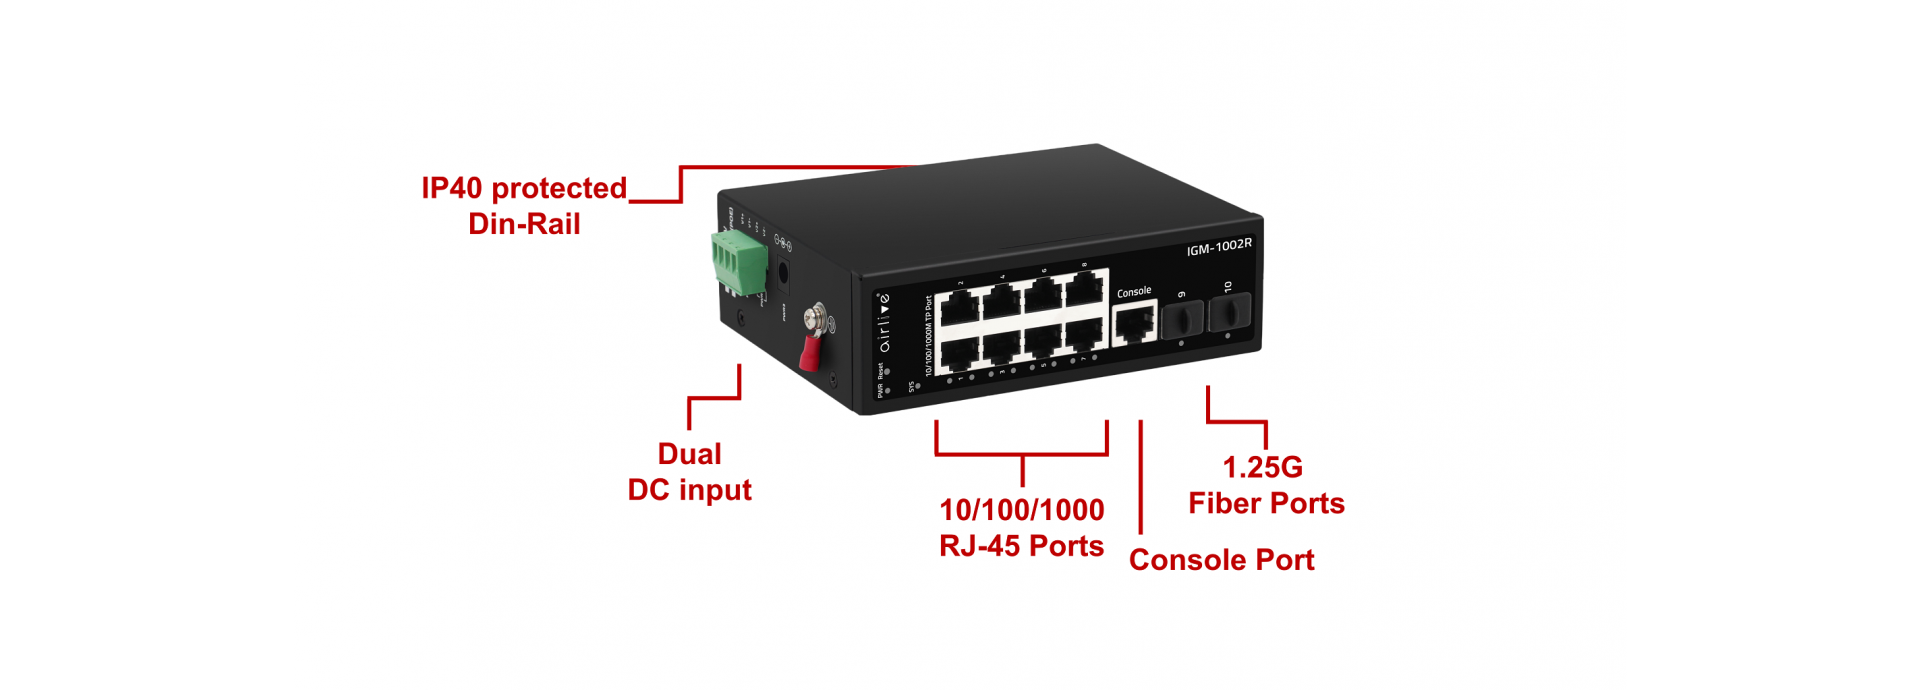 Reliable Industrial-grade Managed  Switch for extreme environment With VLAN and QoS